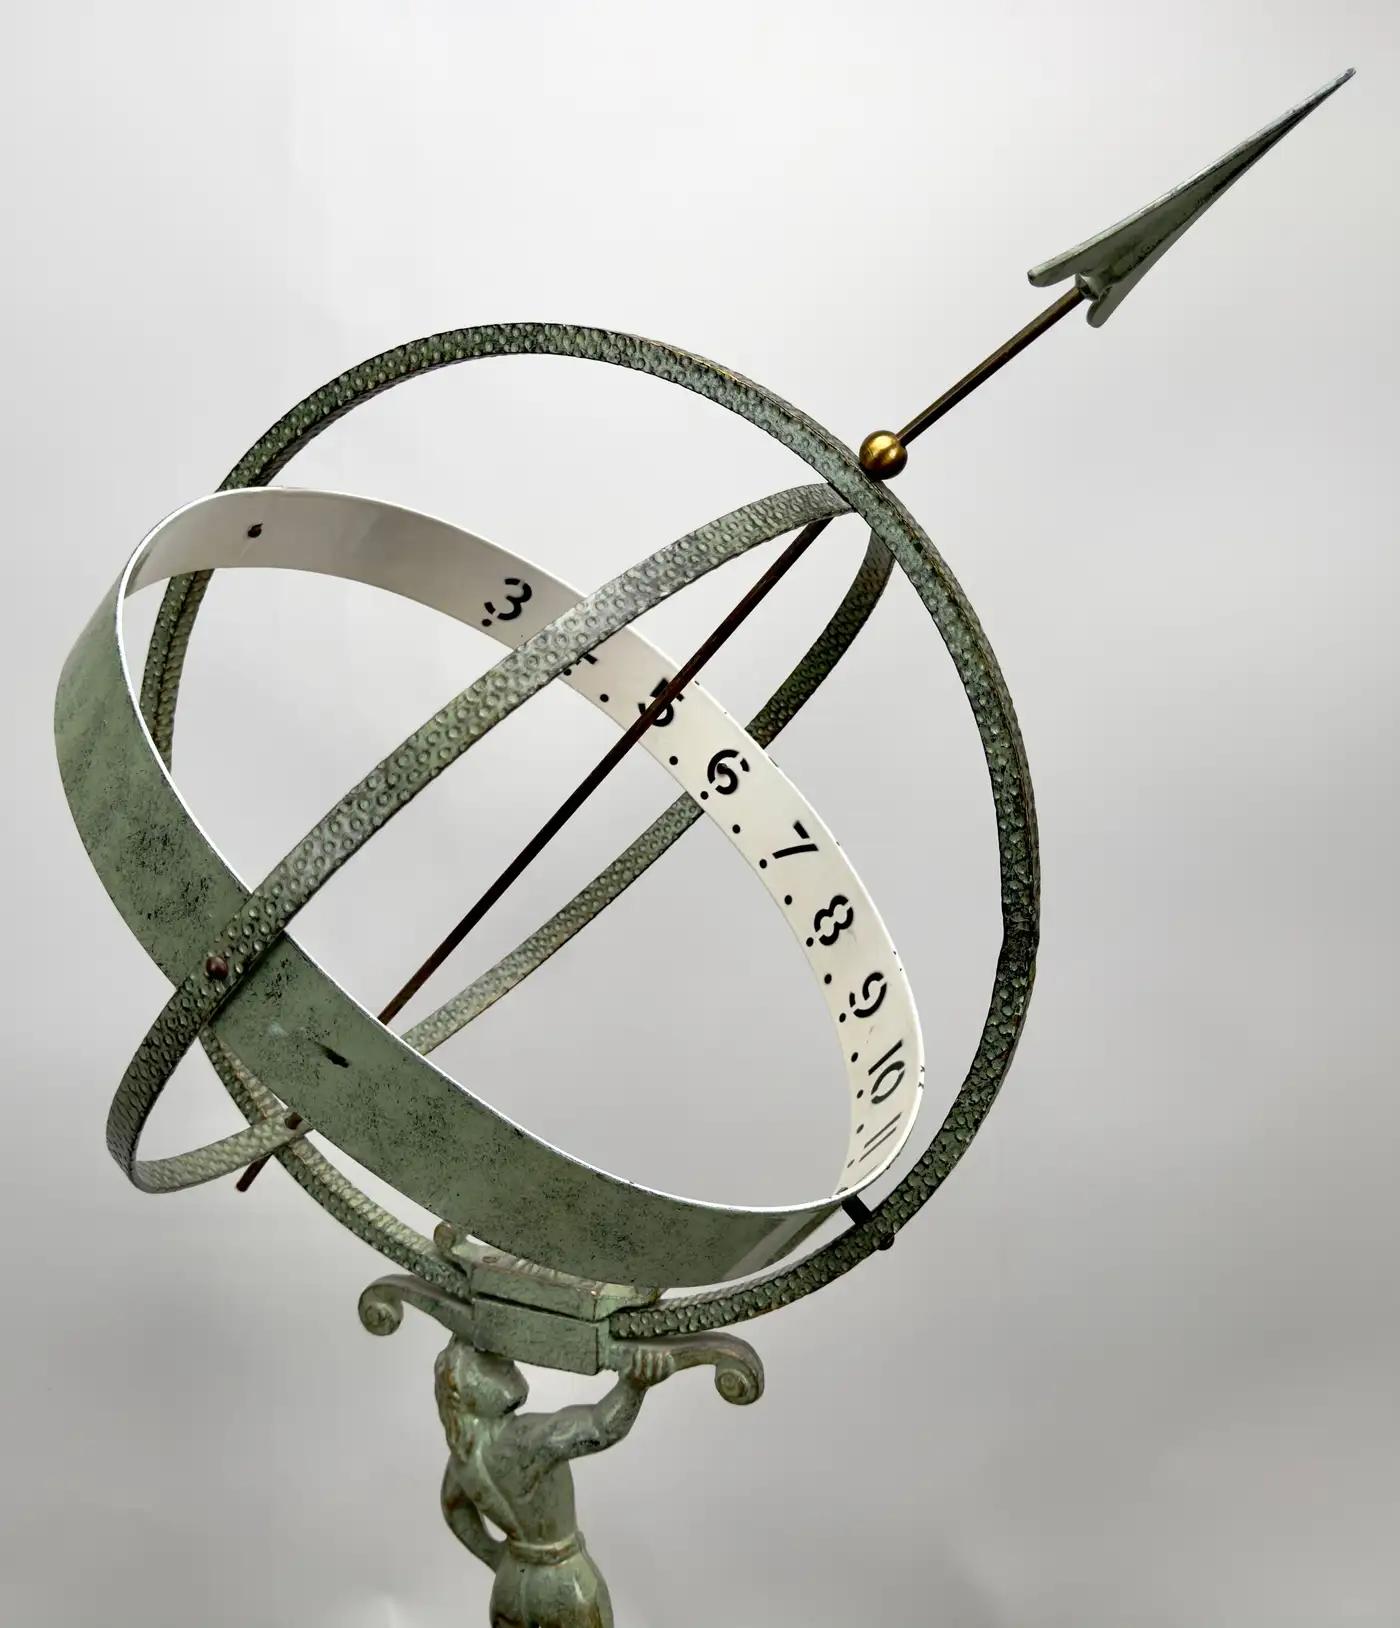 Vintage Swedish Sun Clock or Armillary Sun Dial Attributed to Sune Rooth For Sale 3